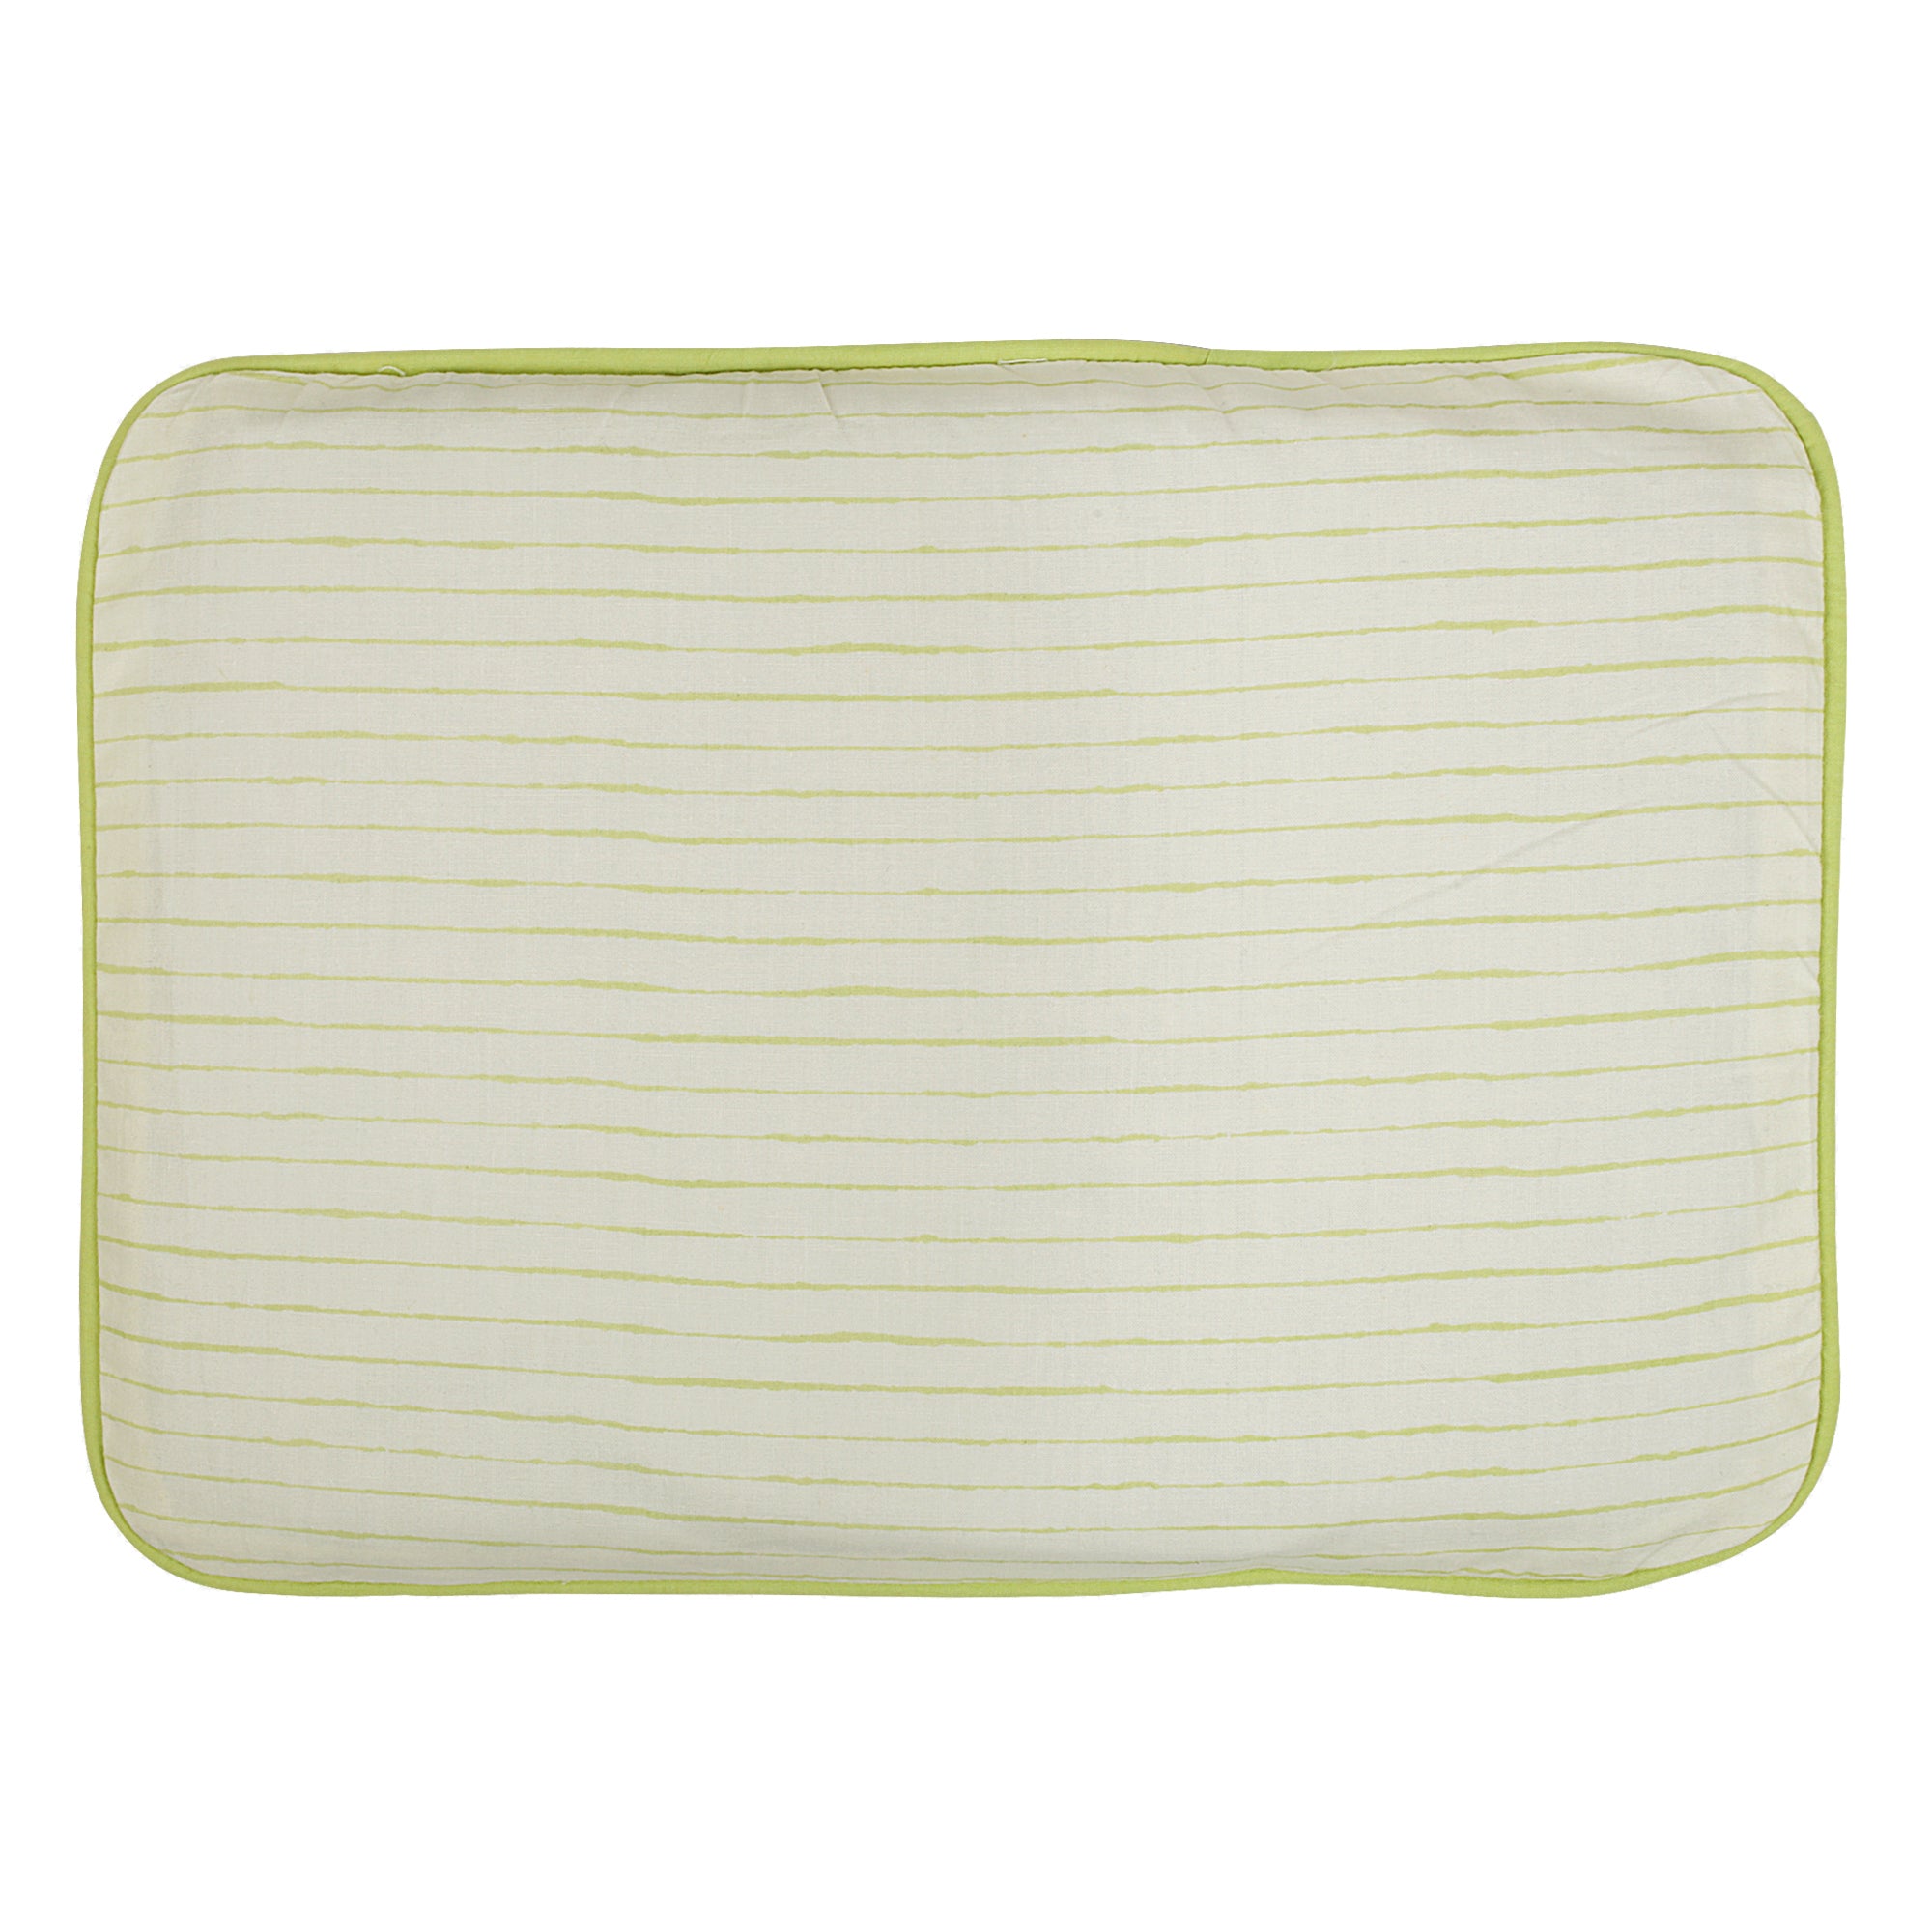 SHADOW LIME LINE MUSTARD PILLOW COVER AND FILLER SET - CLEARANCE